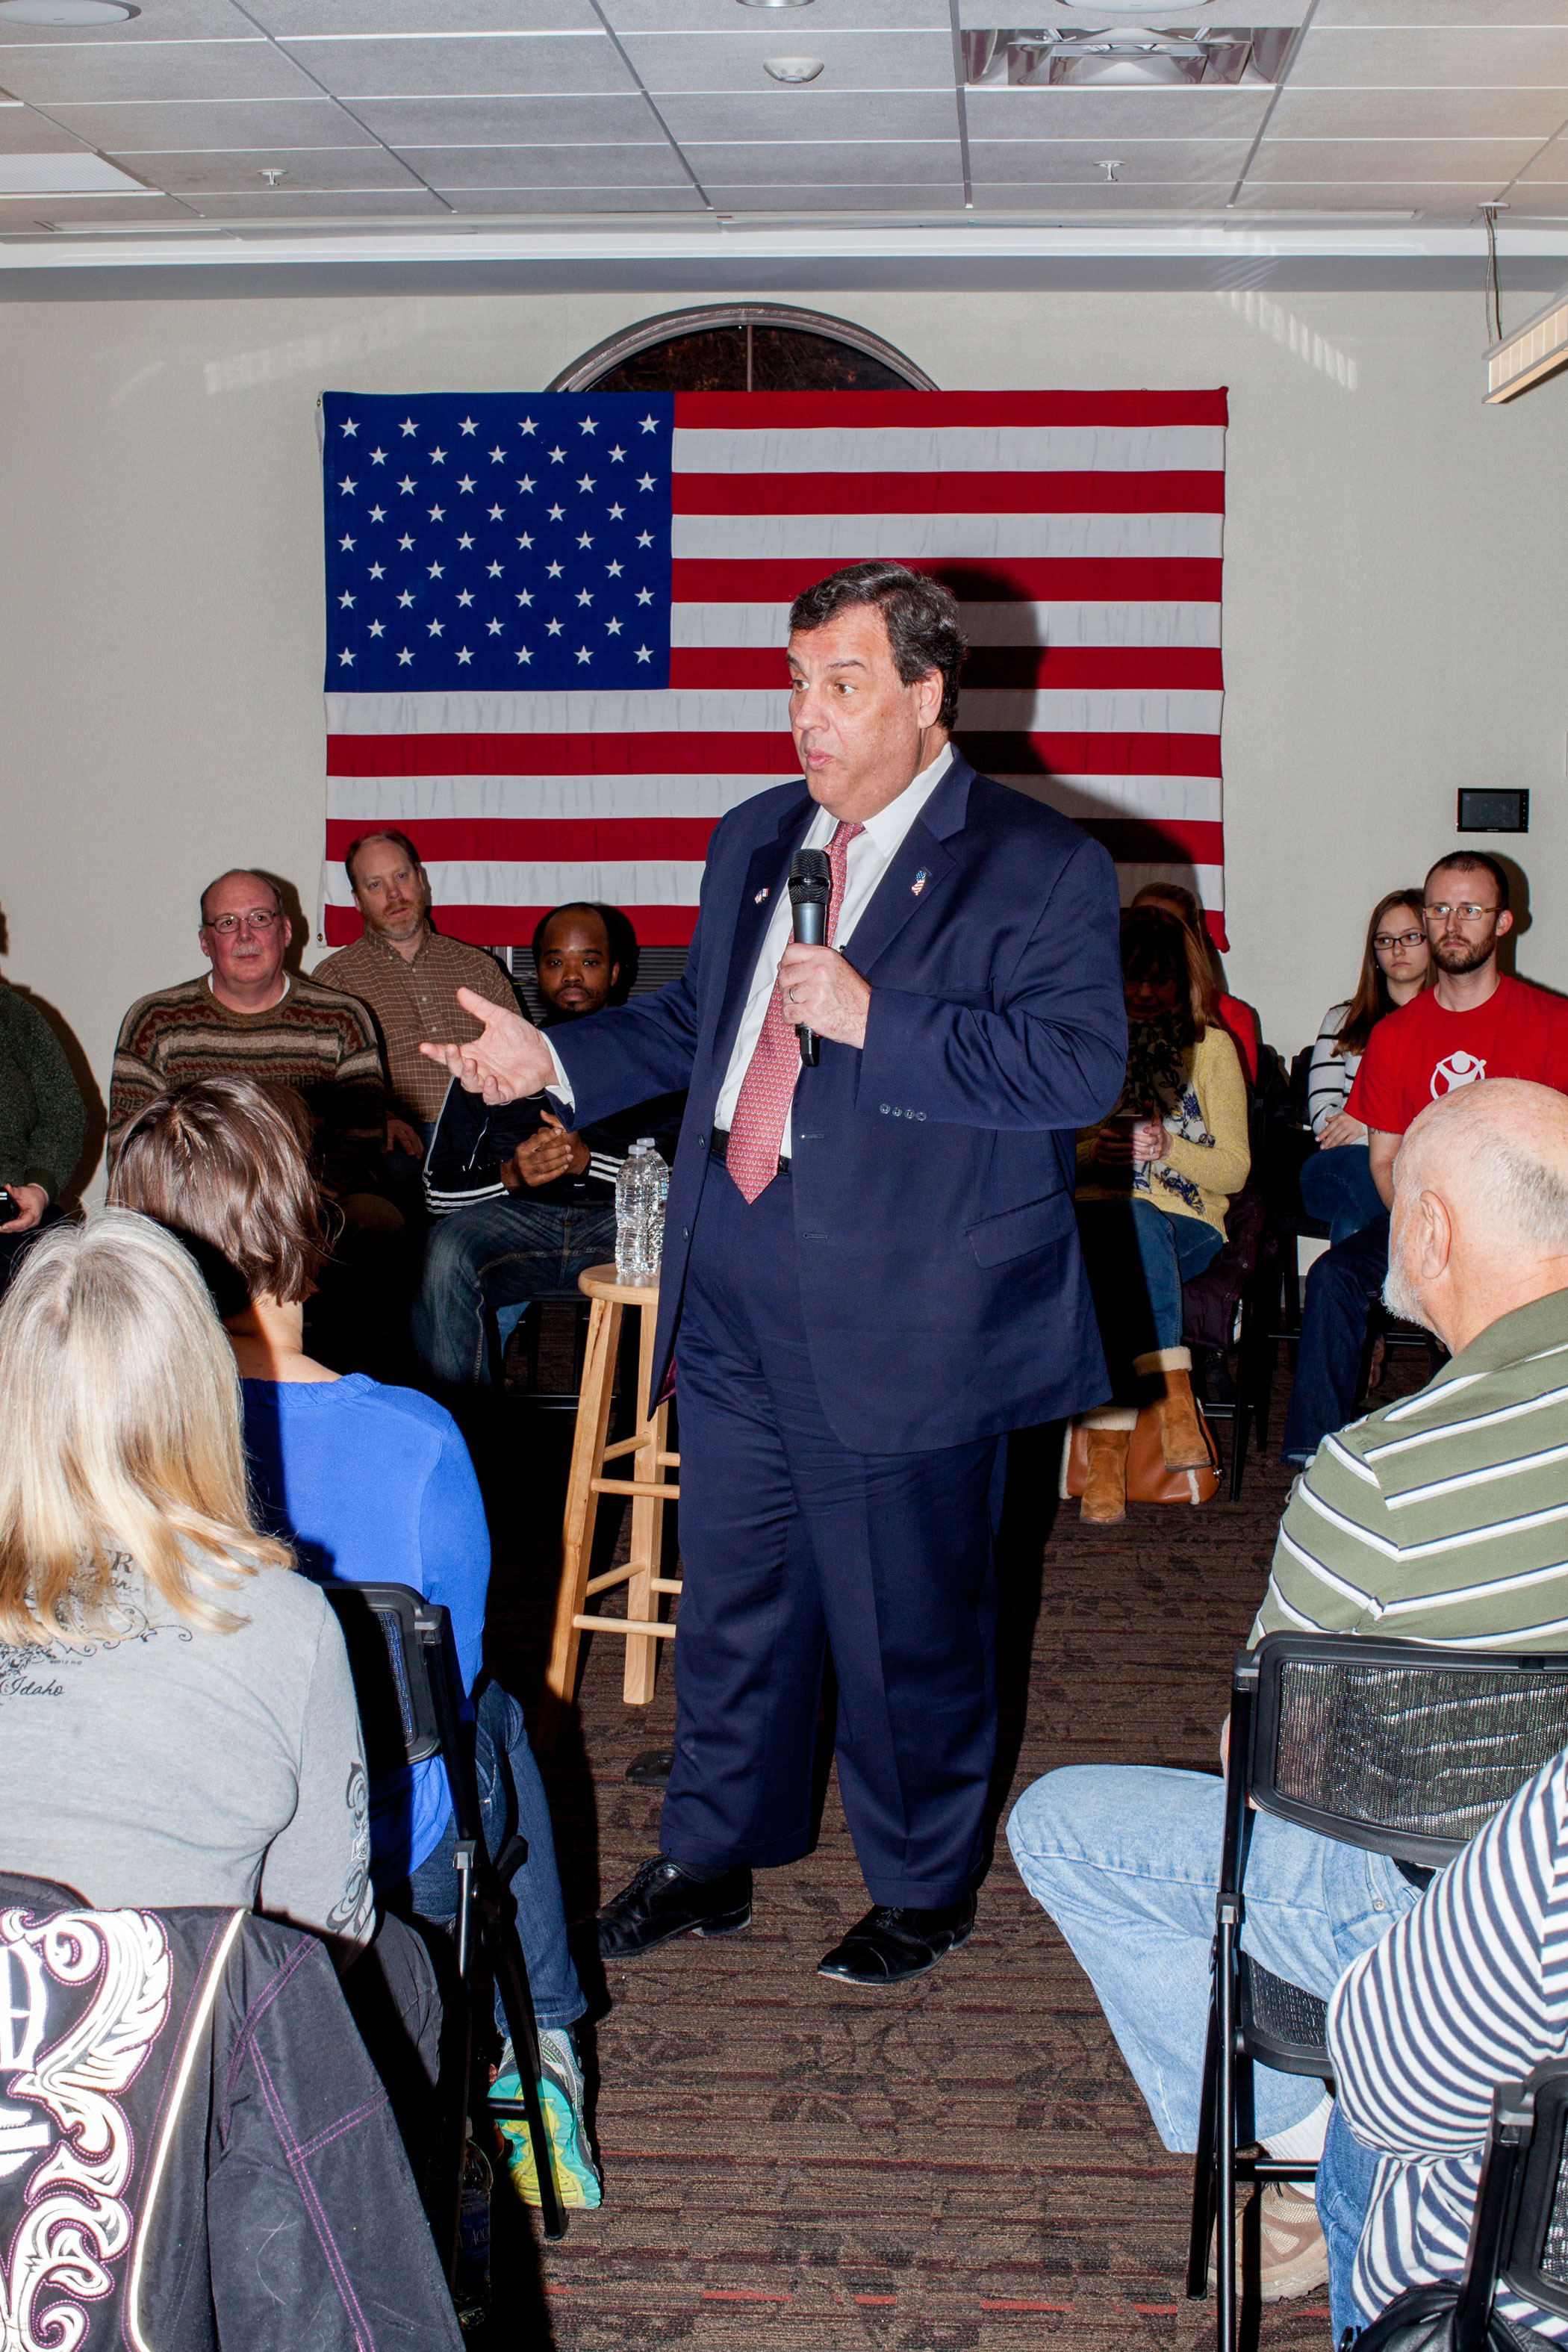 New Jersey Gov. Chris Christie speaks to supporters at a campaign town hall in Pella, Iowa, on Jan. 29.